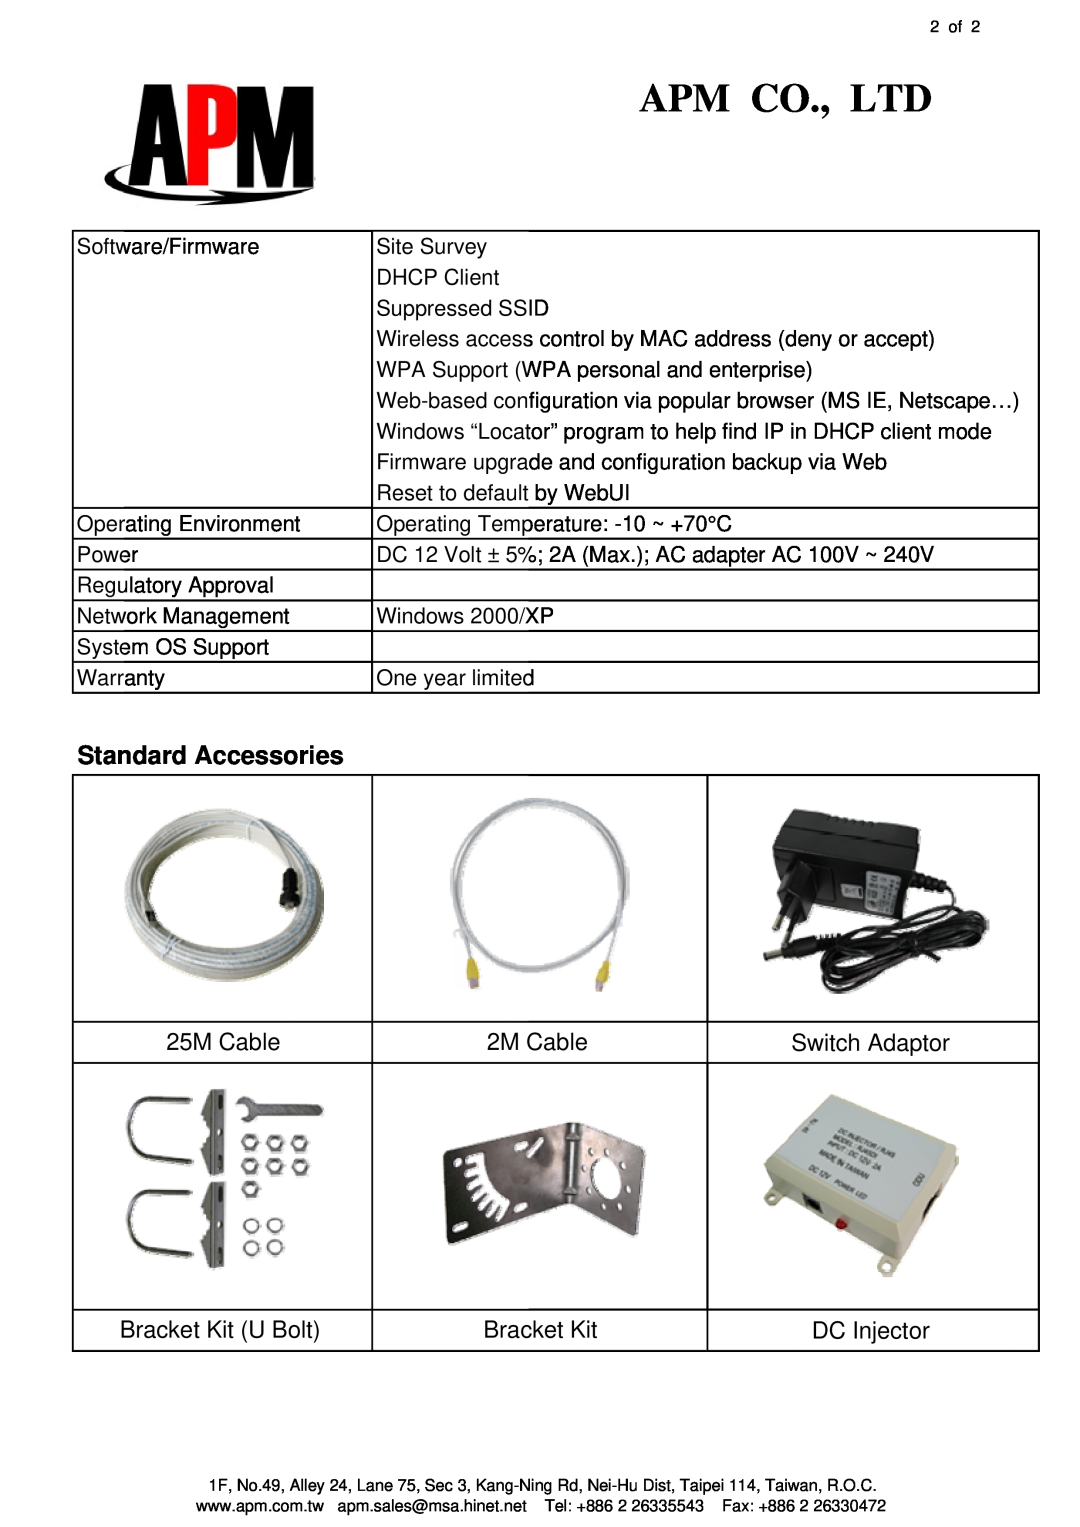 APM APE-24005g specifications Standard Accessories, 25M Cable, 2M Cable, Switch Adaptor, Bracket Kit U Bolt, DC Injector 